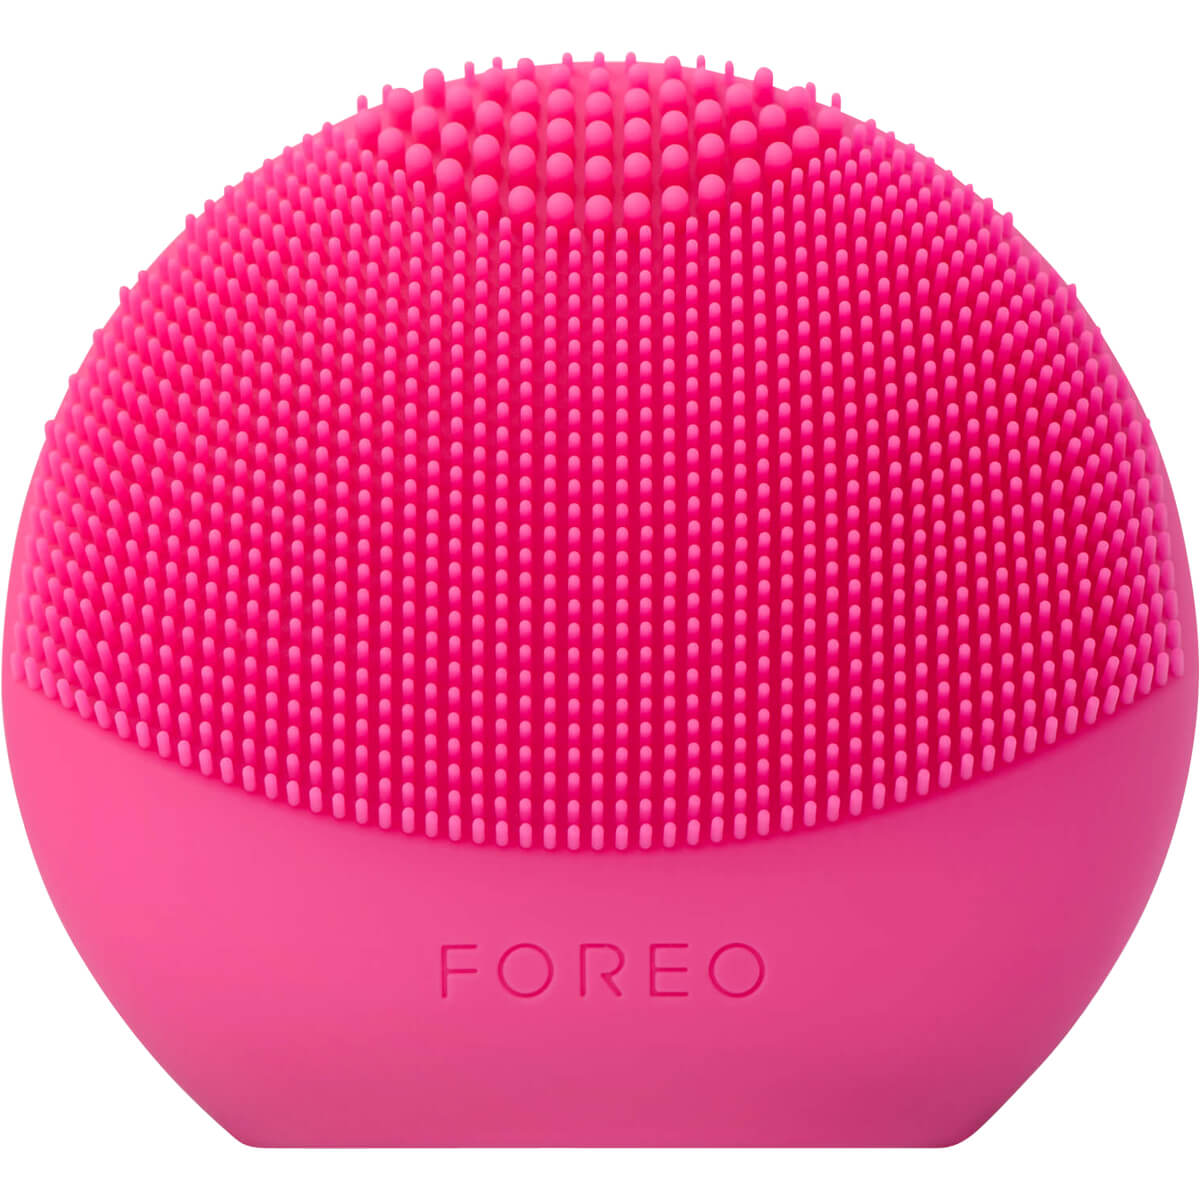 FOREO PEACH 2 IPL Hair Removal Advanced | CurrentBody Device US